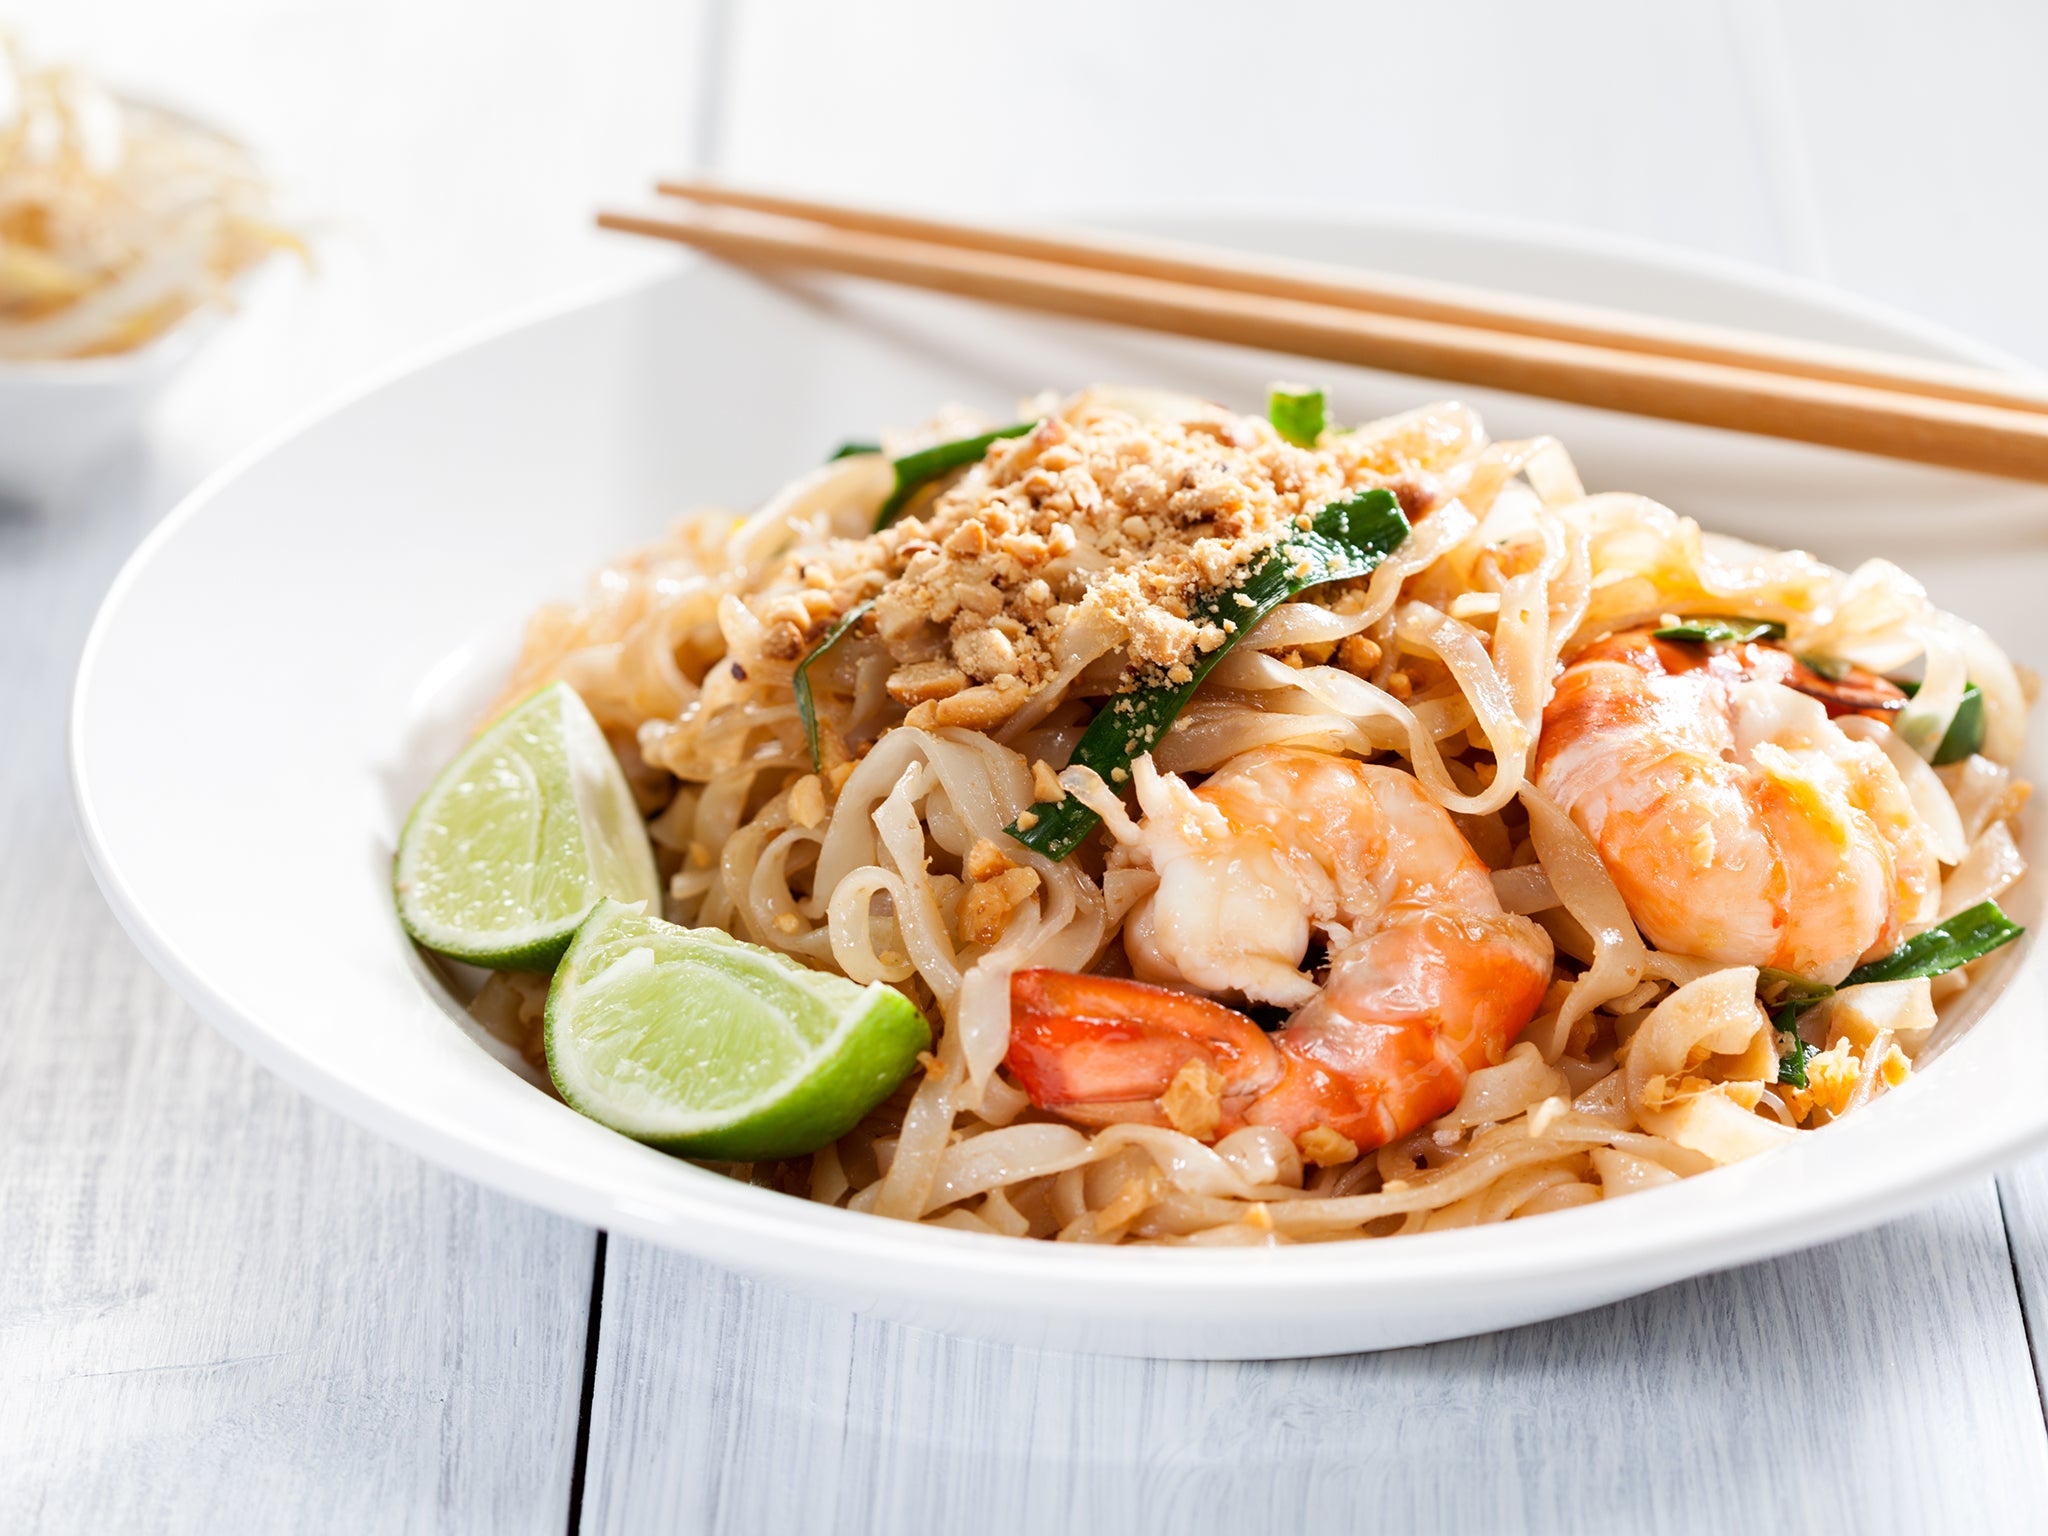 Pad thai is Thailand’s national dish, but not because it is traditional